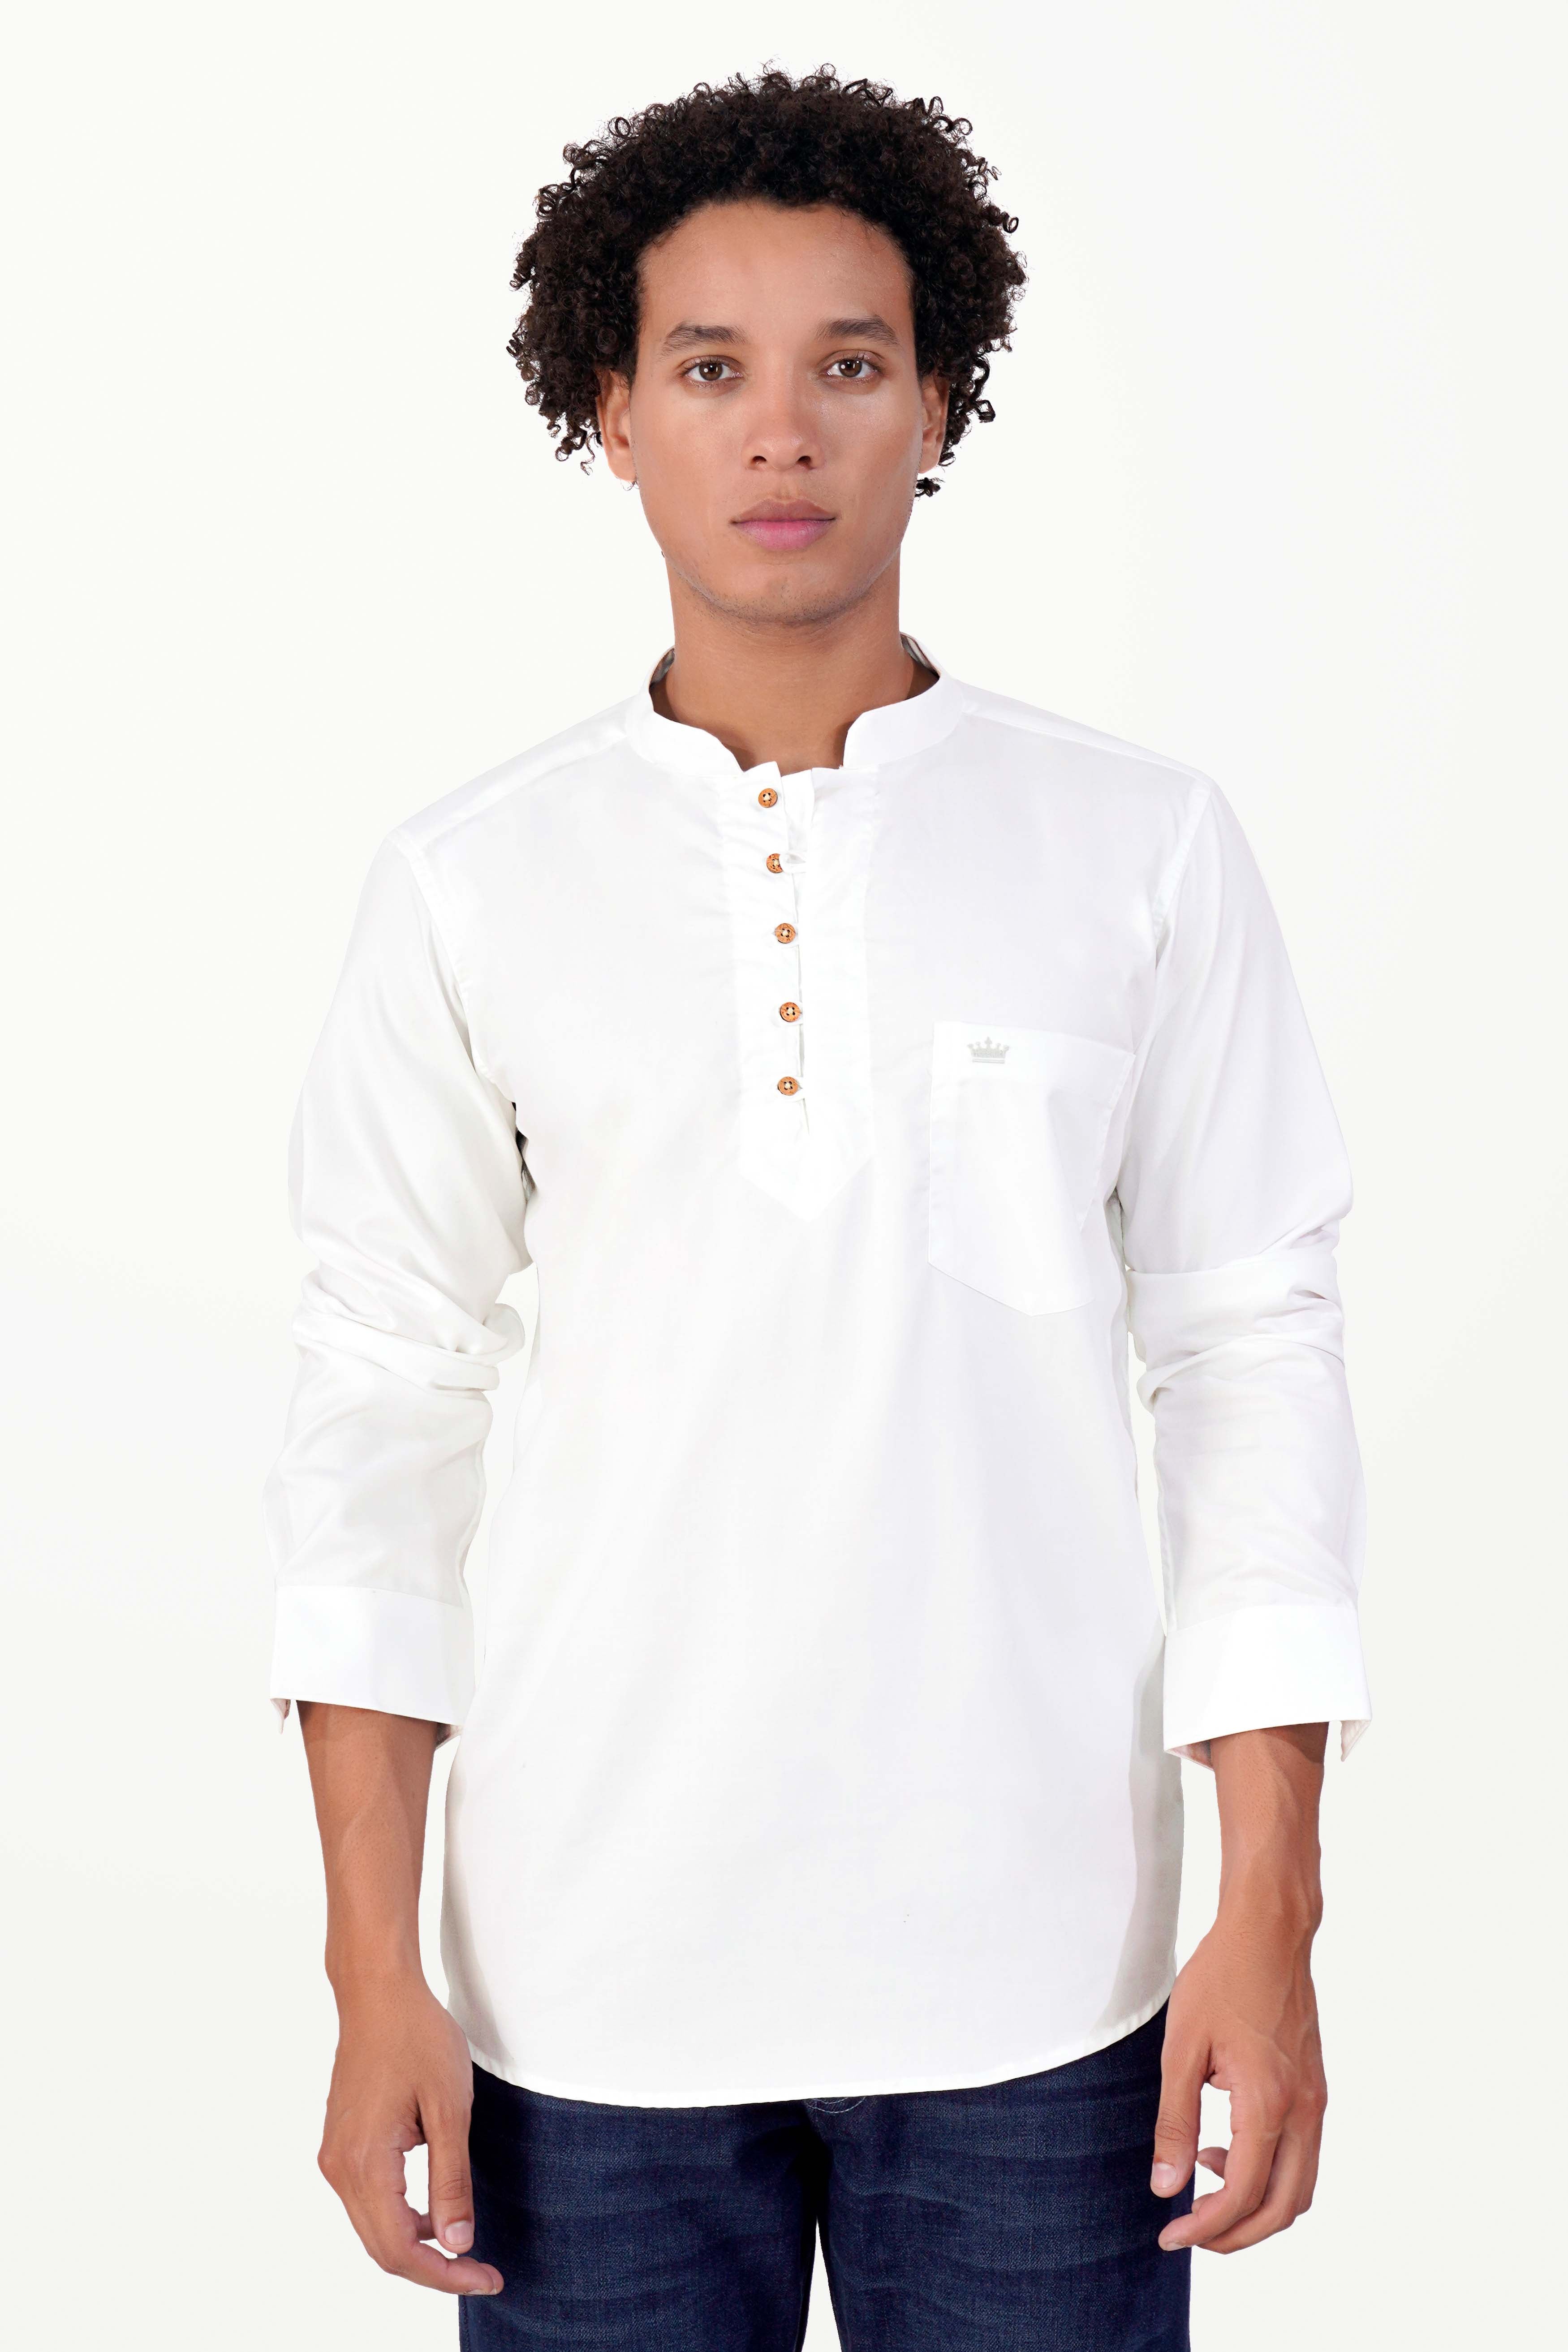 Bright White Multicolour Hand Painted with a Strong Message Twill Premium Cotton Designer Kurta Shirt 8574-KS-ART-38, 8574-KS-ART-H-38, 8574-KS-ART-39, 8574-KS-ART-H-39, 8574-KS-ART-40, 8574-KS-ART-H-40, 8574-KS-ART-42, 8574-KS-ART-H-42, 8574-KS-ART-44, 8574-KS-ART-H-44, 8574-KS-ART-46, 8574-KS-ART-H-46, 8574-KS-ART-48, 8574-KS-ART-H-48, 8574-KS-ART-50, 8574-KS-ART-H-50, 8574-KS-ART-52, 8574-KS-ART-H-52